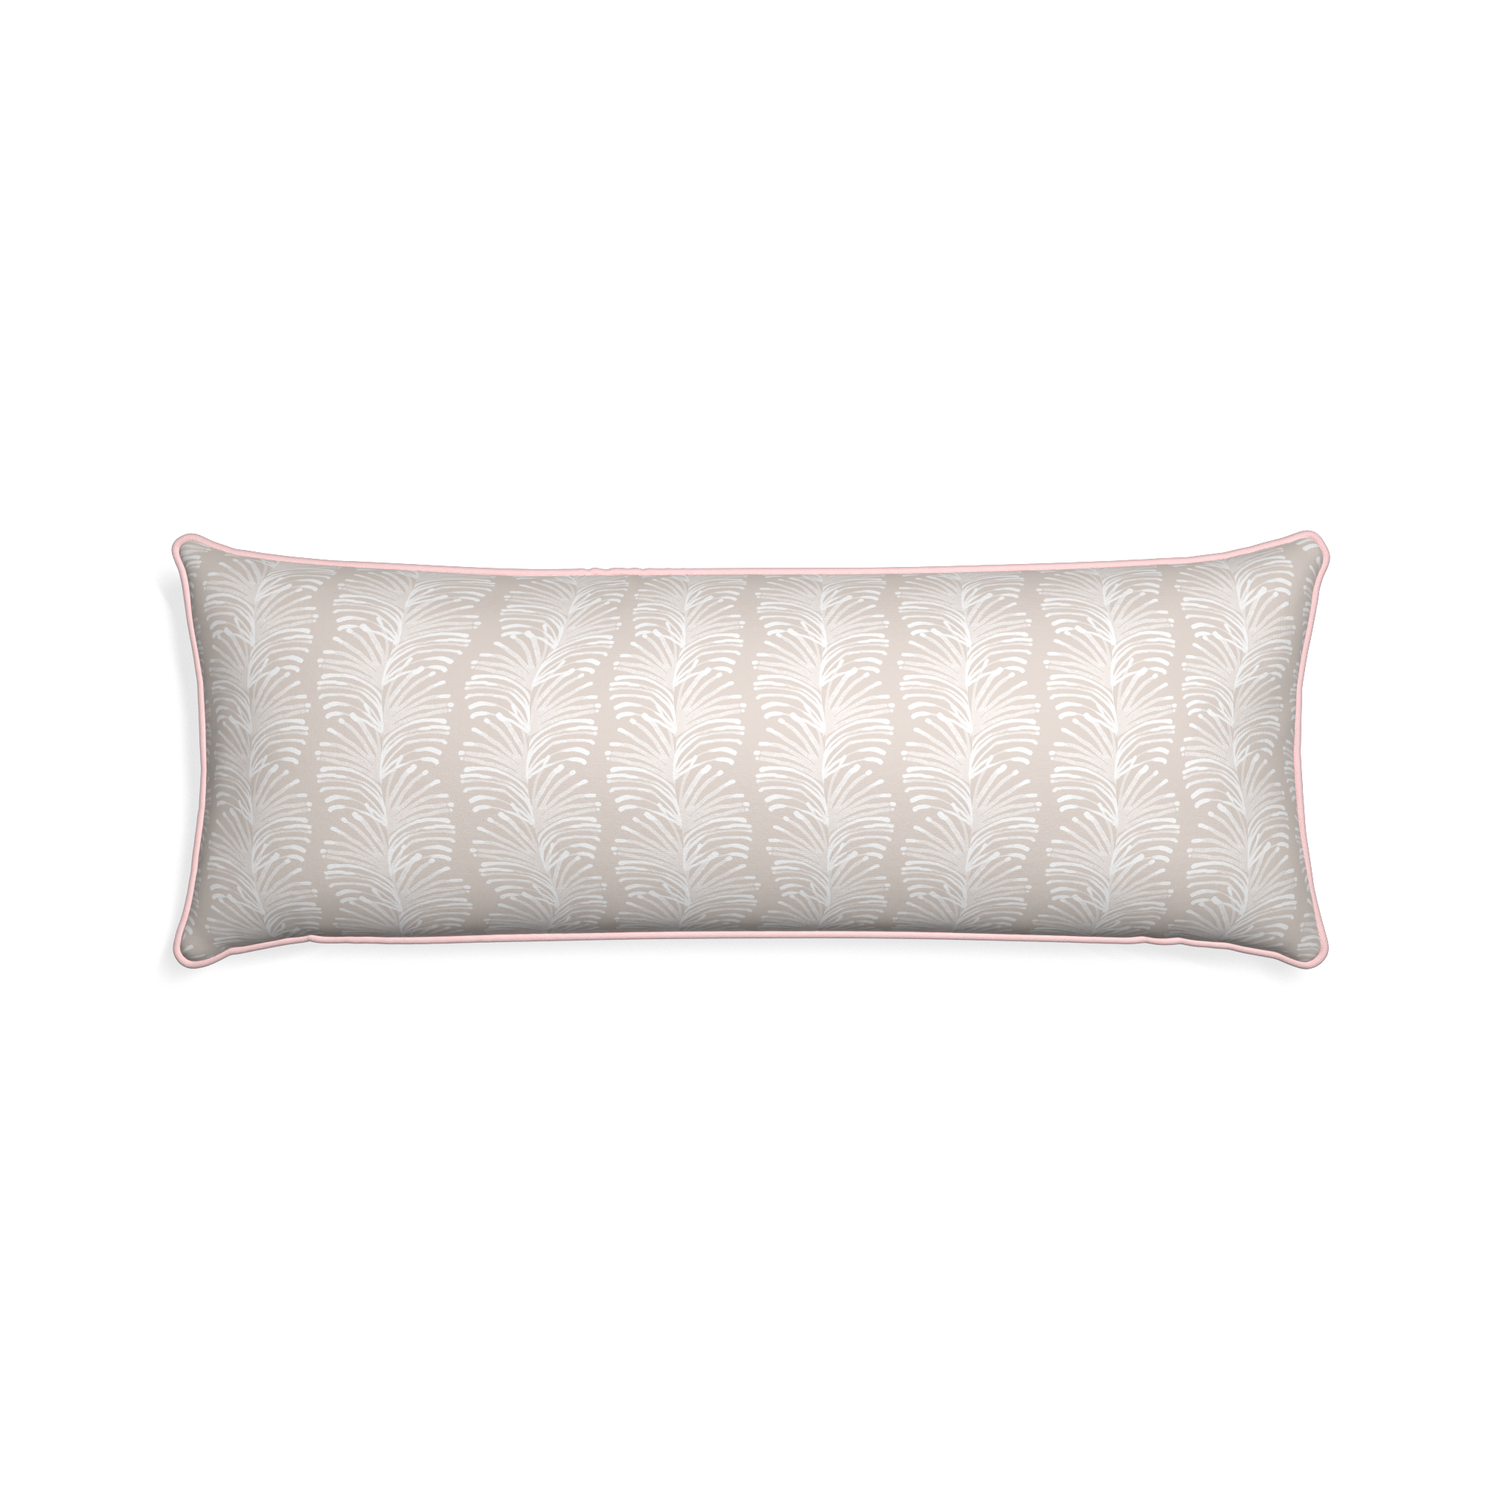 Xl-lumbar emma sand custom pillow with petal piping on white background